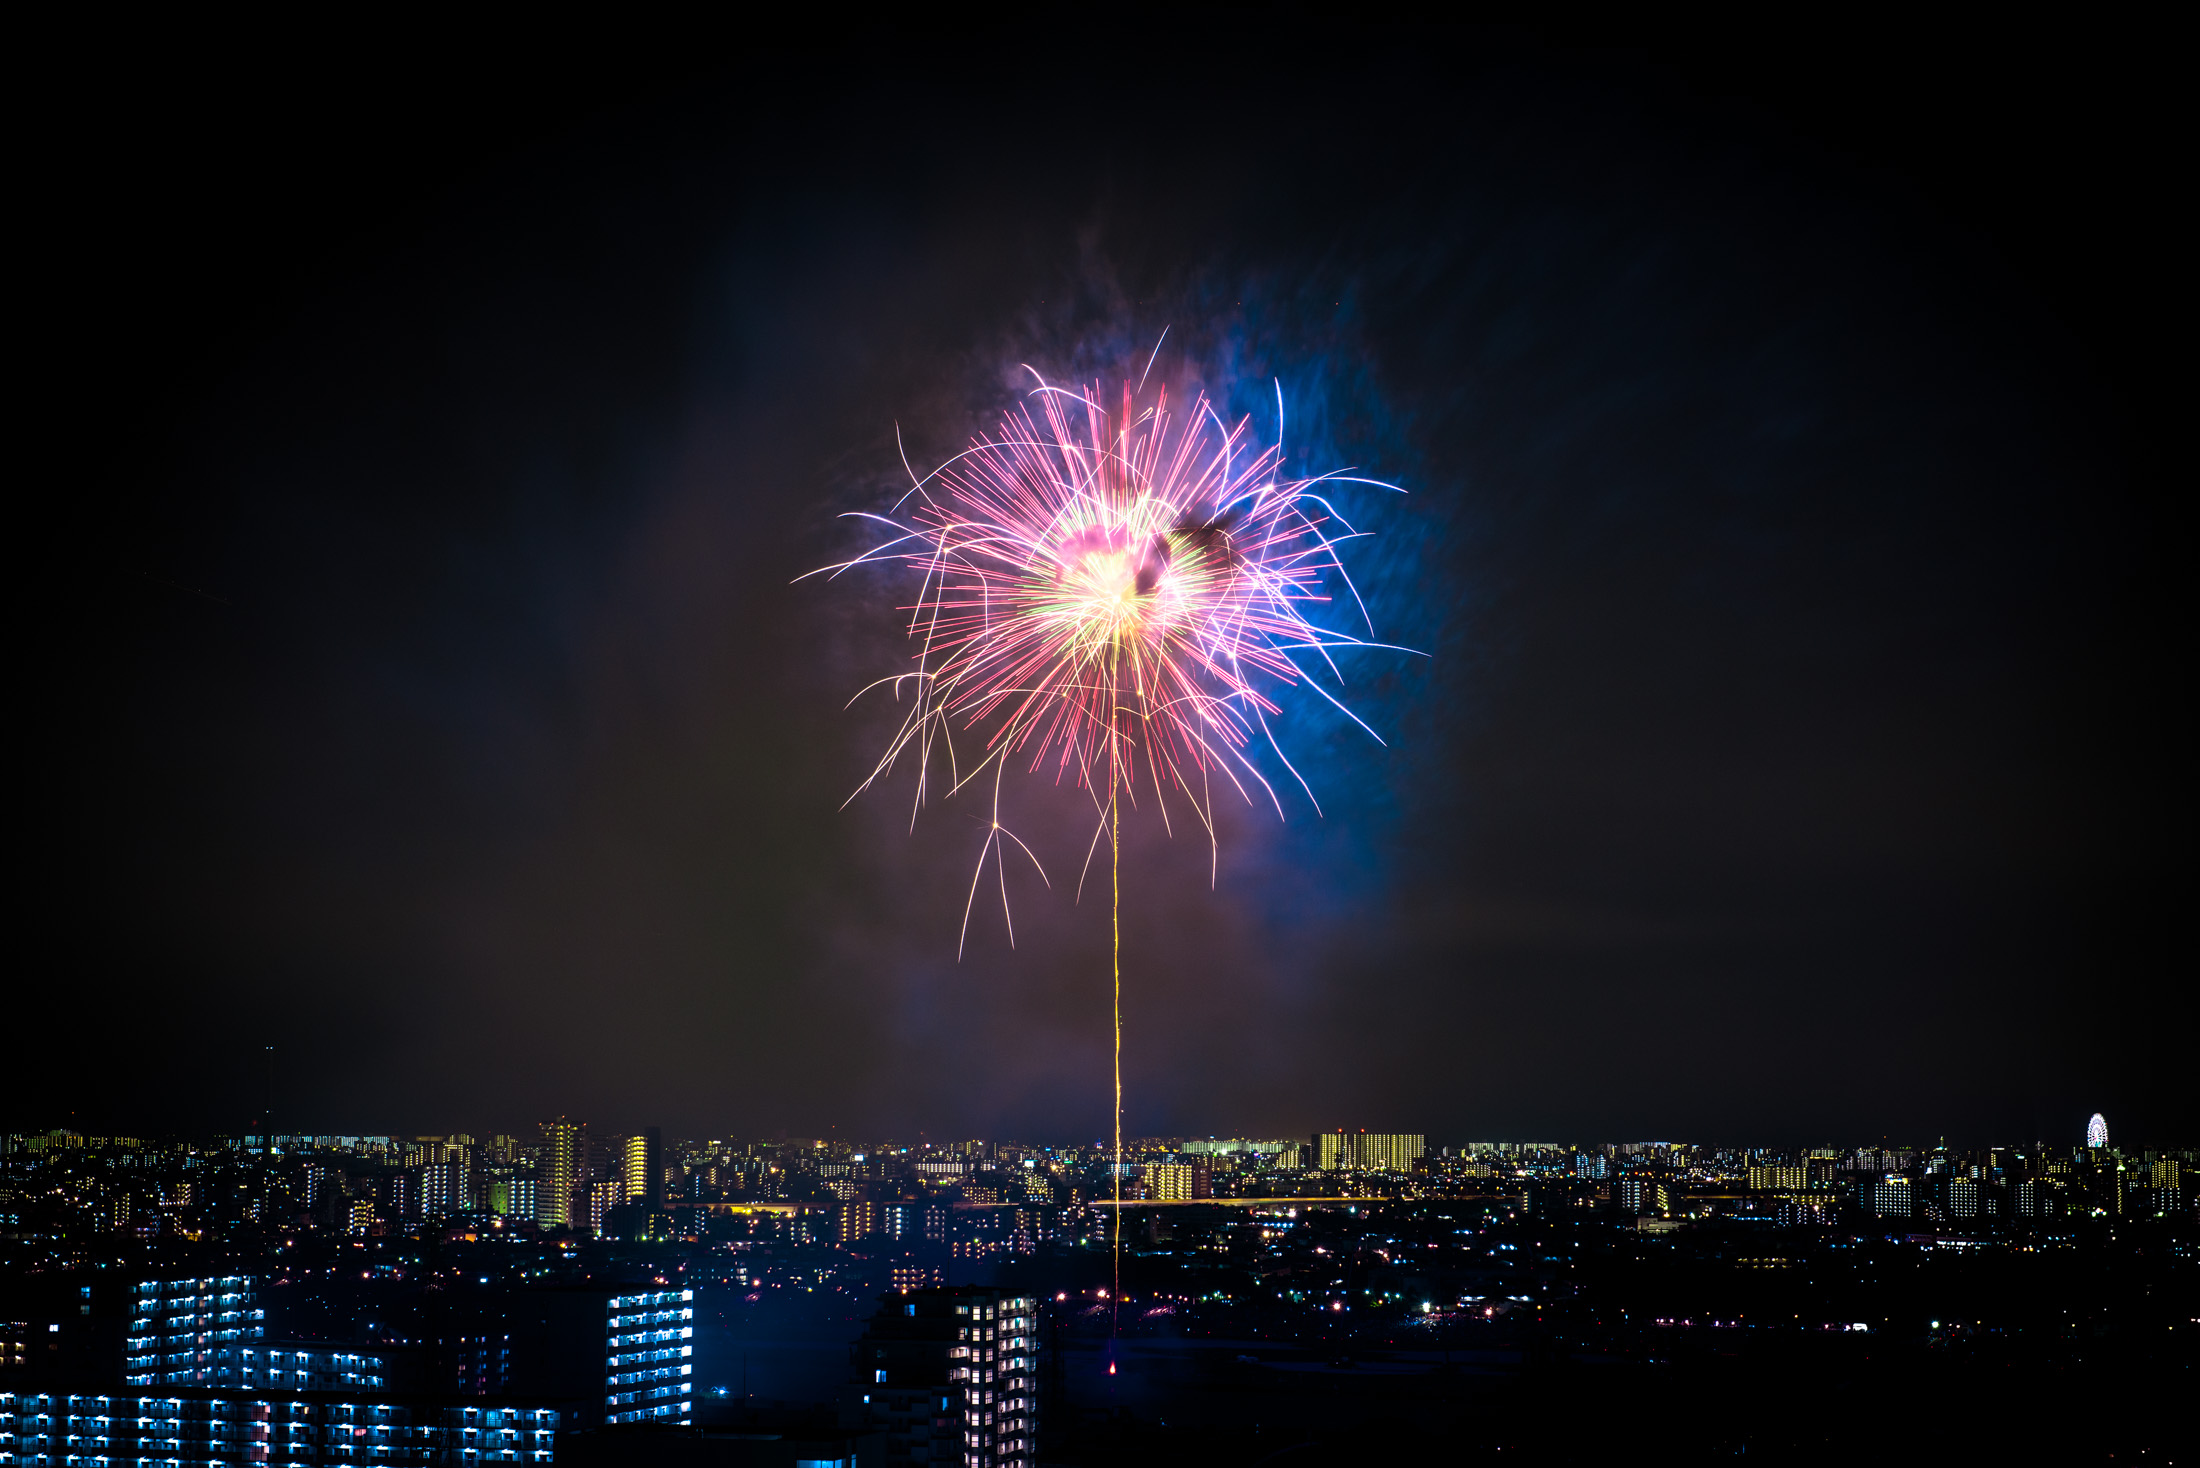 Edogawa City Fireworks Spectacular lighting up the night sky with vibrant colors.